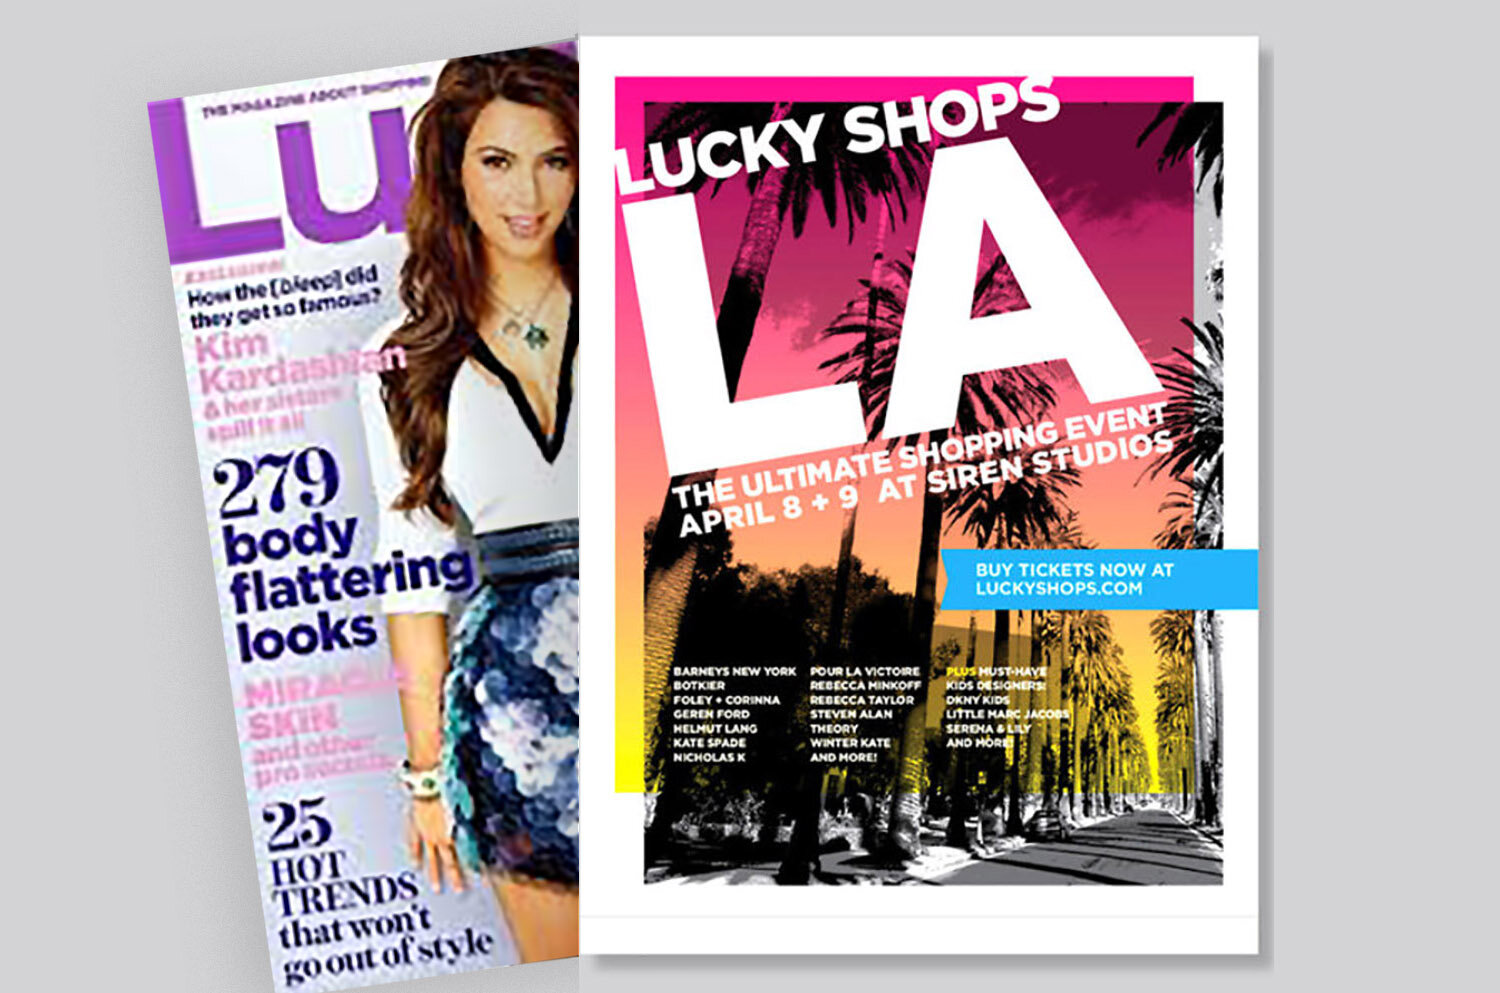 Years of NYC success led Lucky Shops to launch in LA!